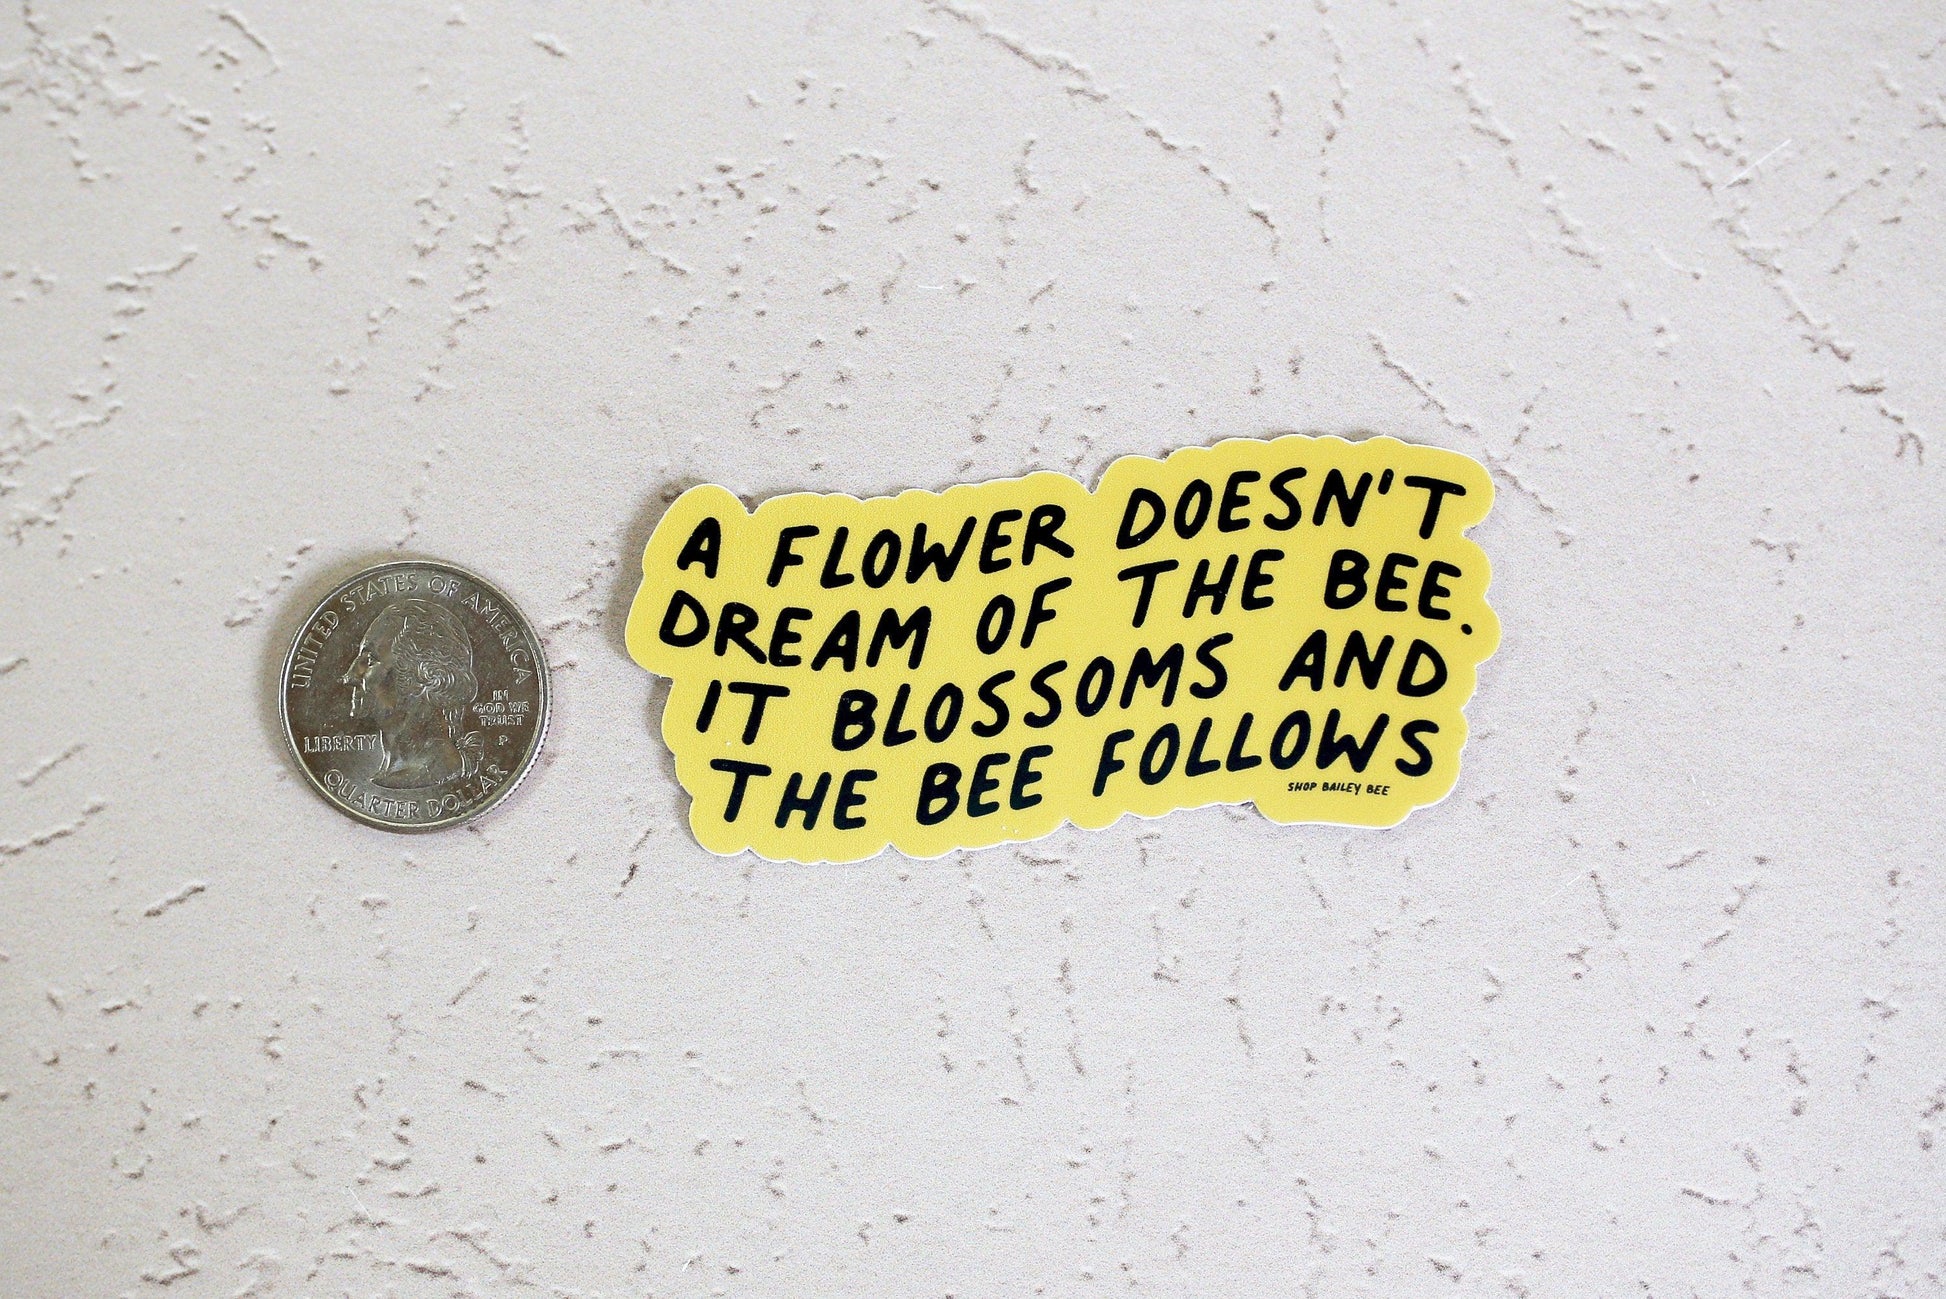 flower doesn't dream of the bee it blossoms and the bee follows against a quarter for size comparison